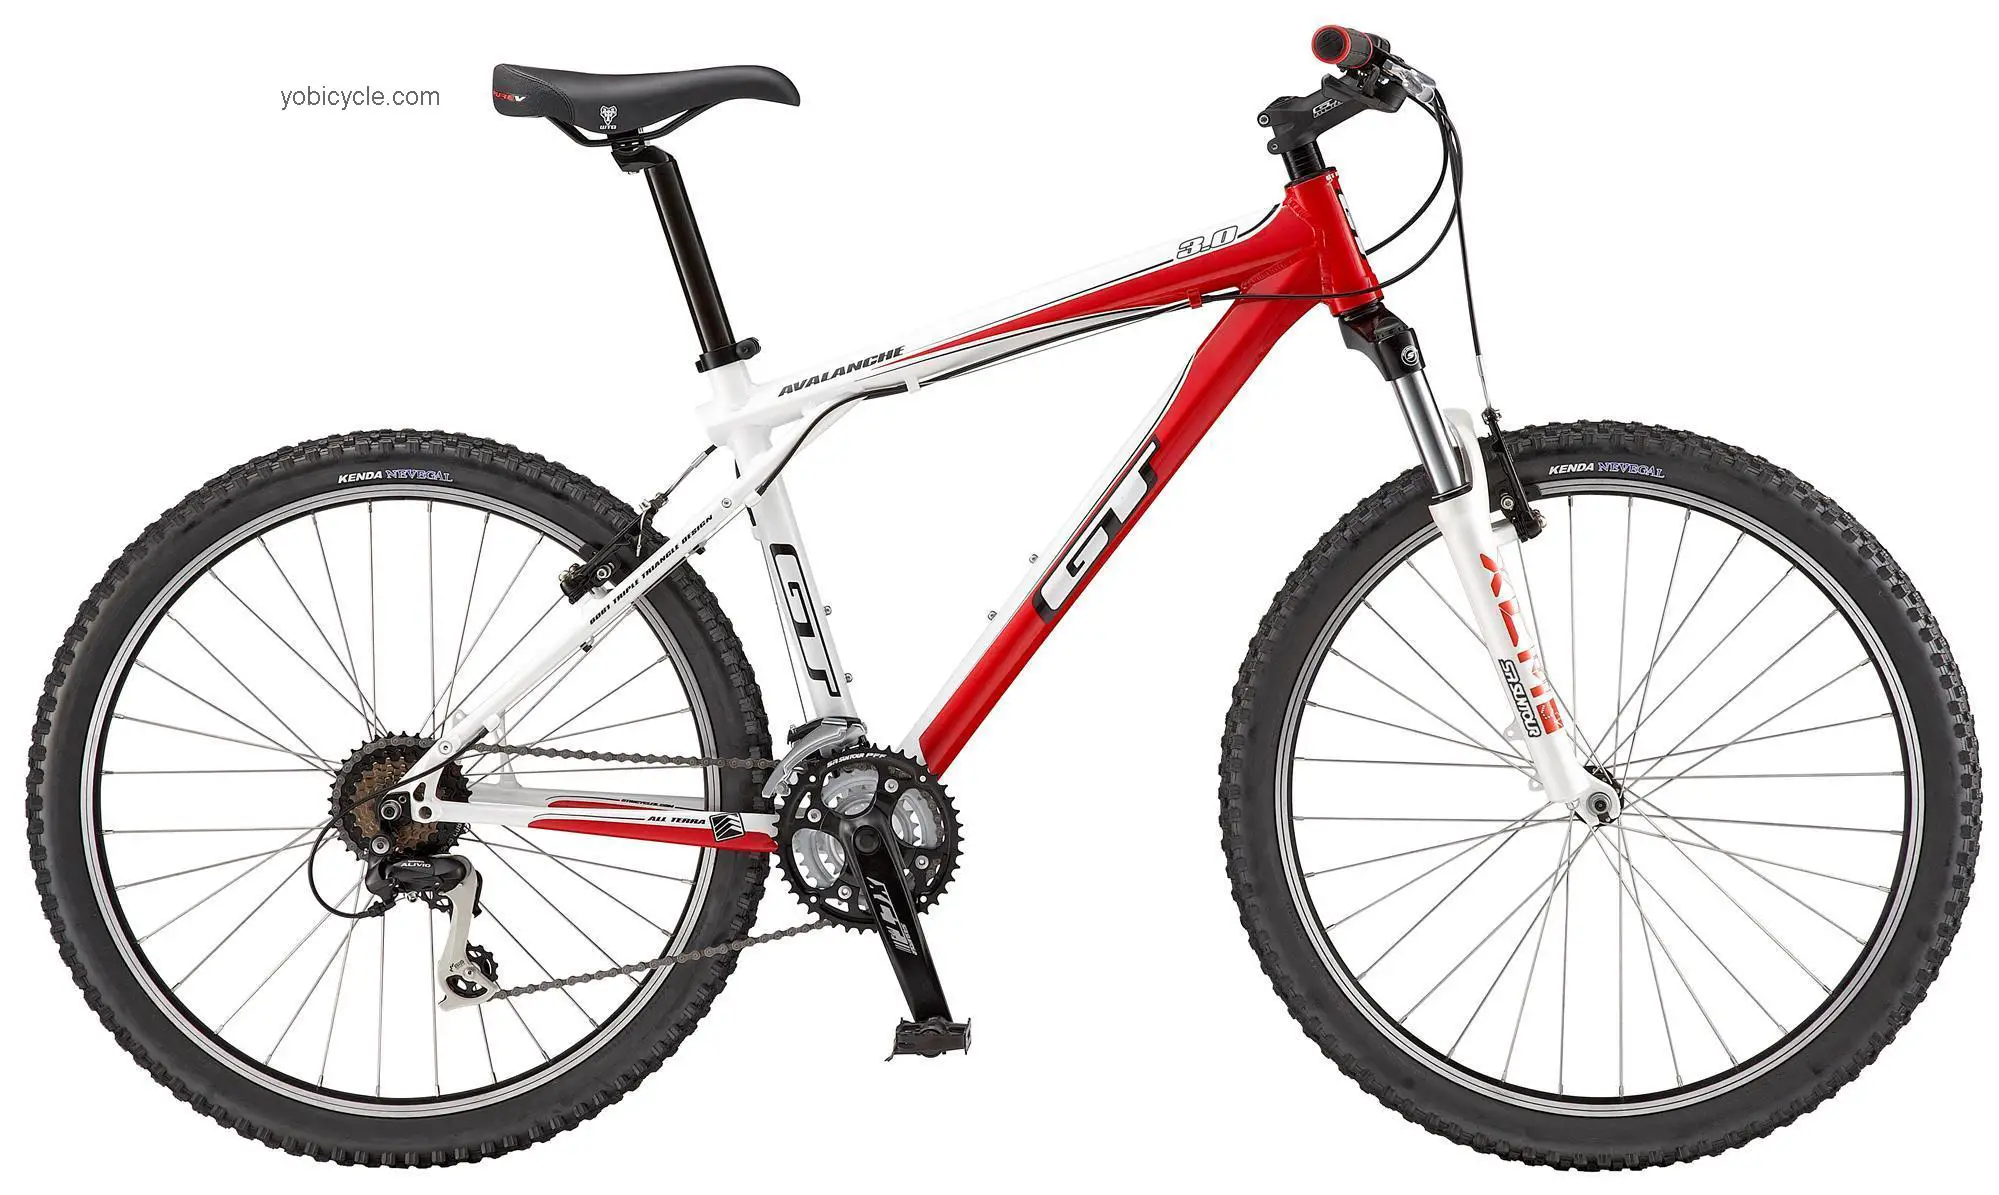 GT Avalanche 3.0 2010 comparison online with competitors